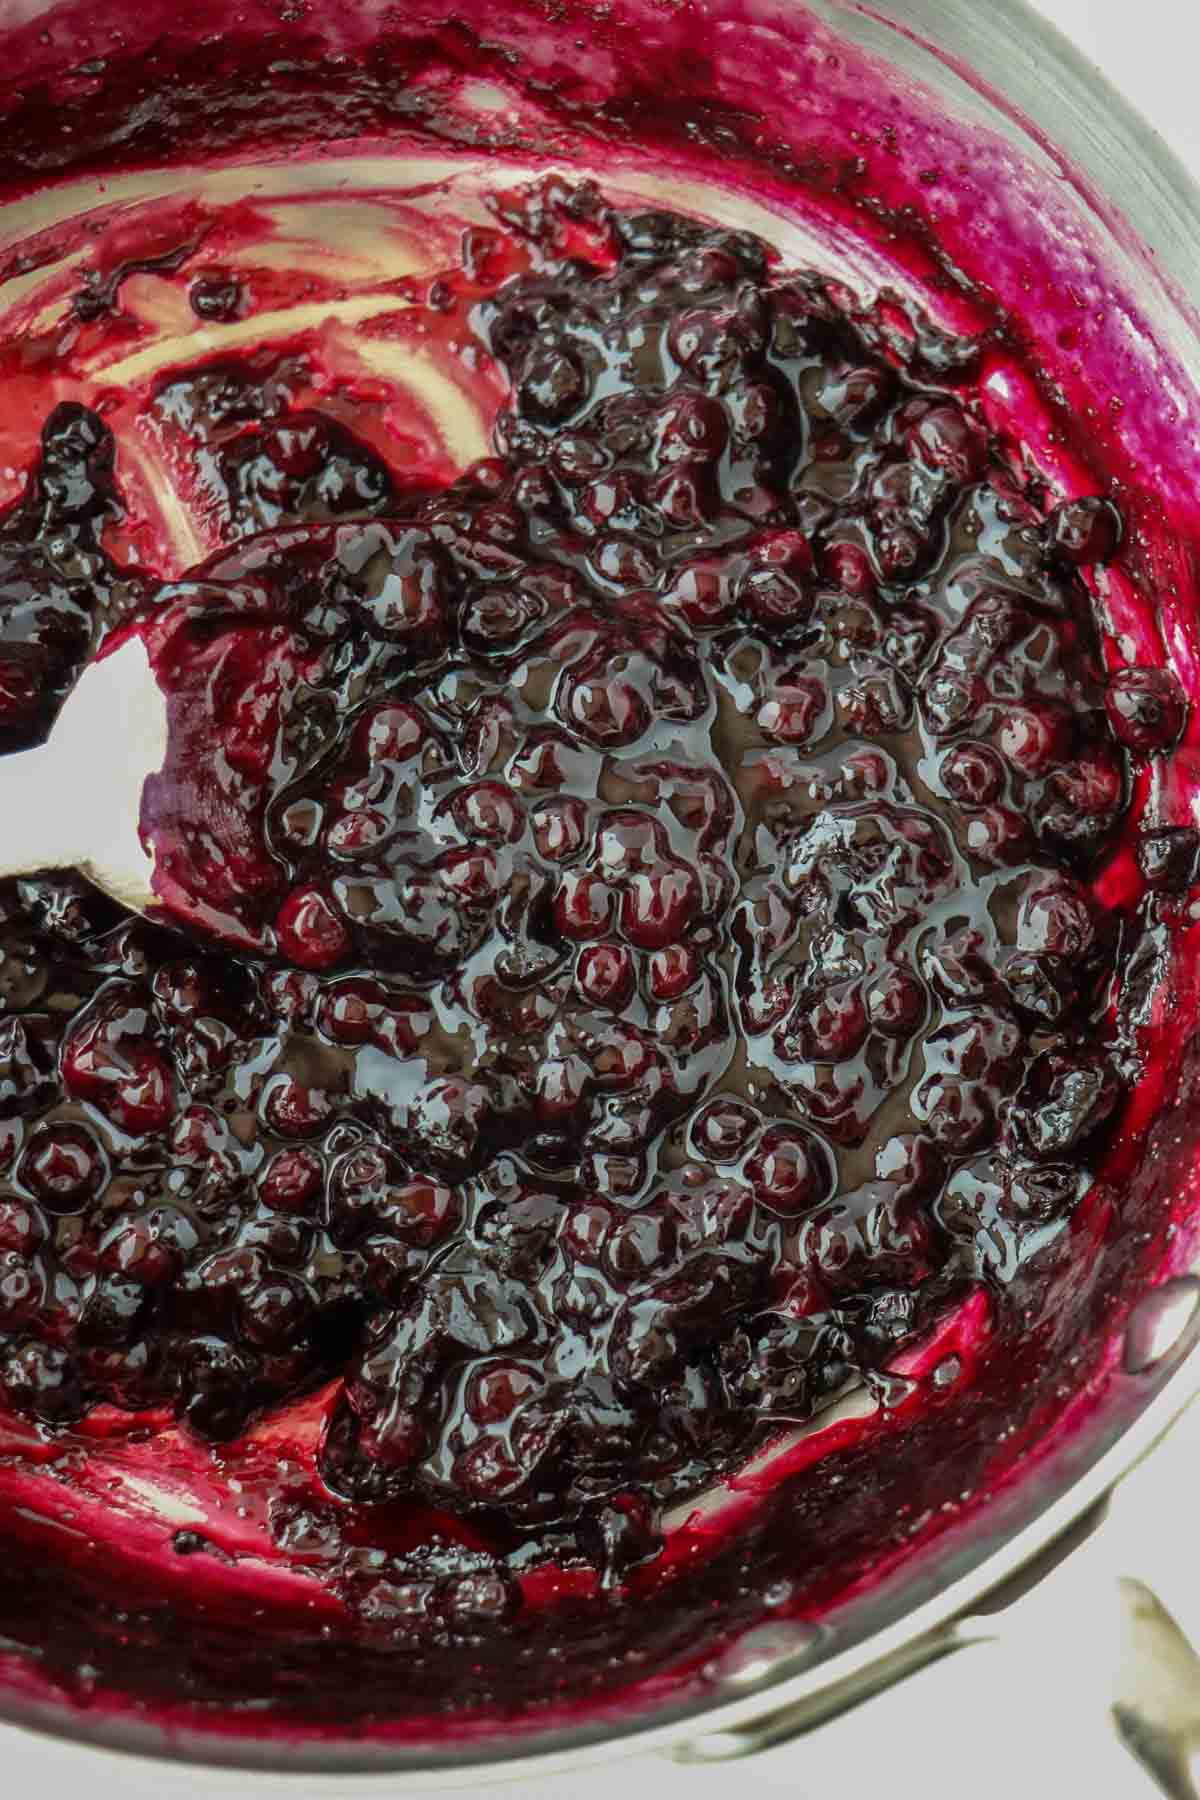 Blueberry filling in a pan with a wooden spoon.